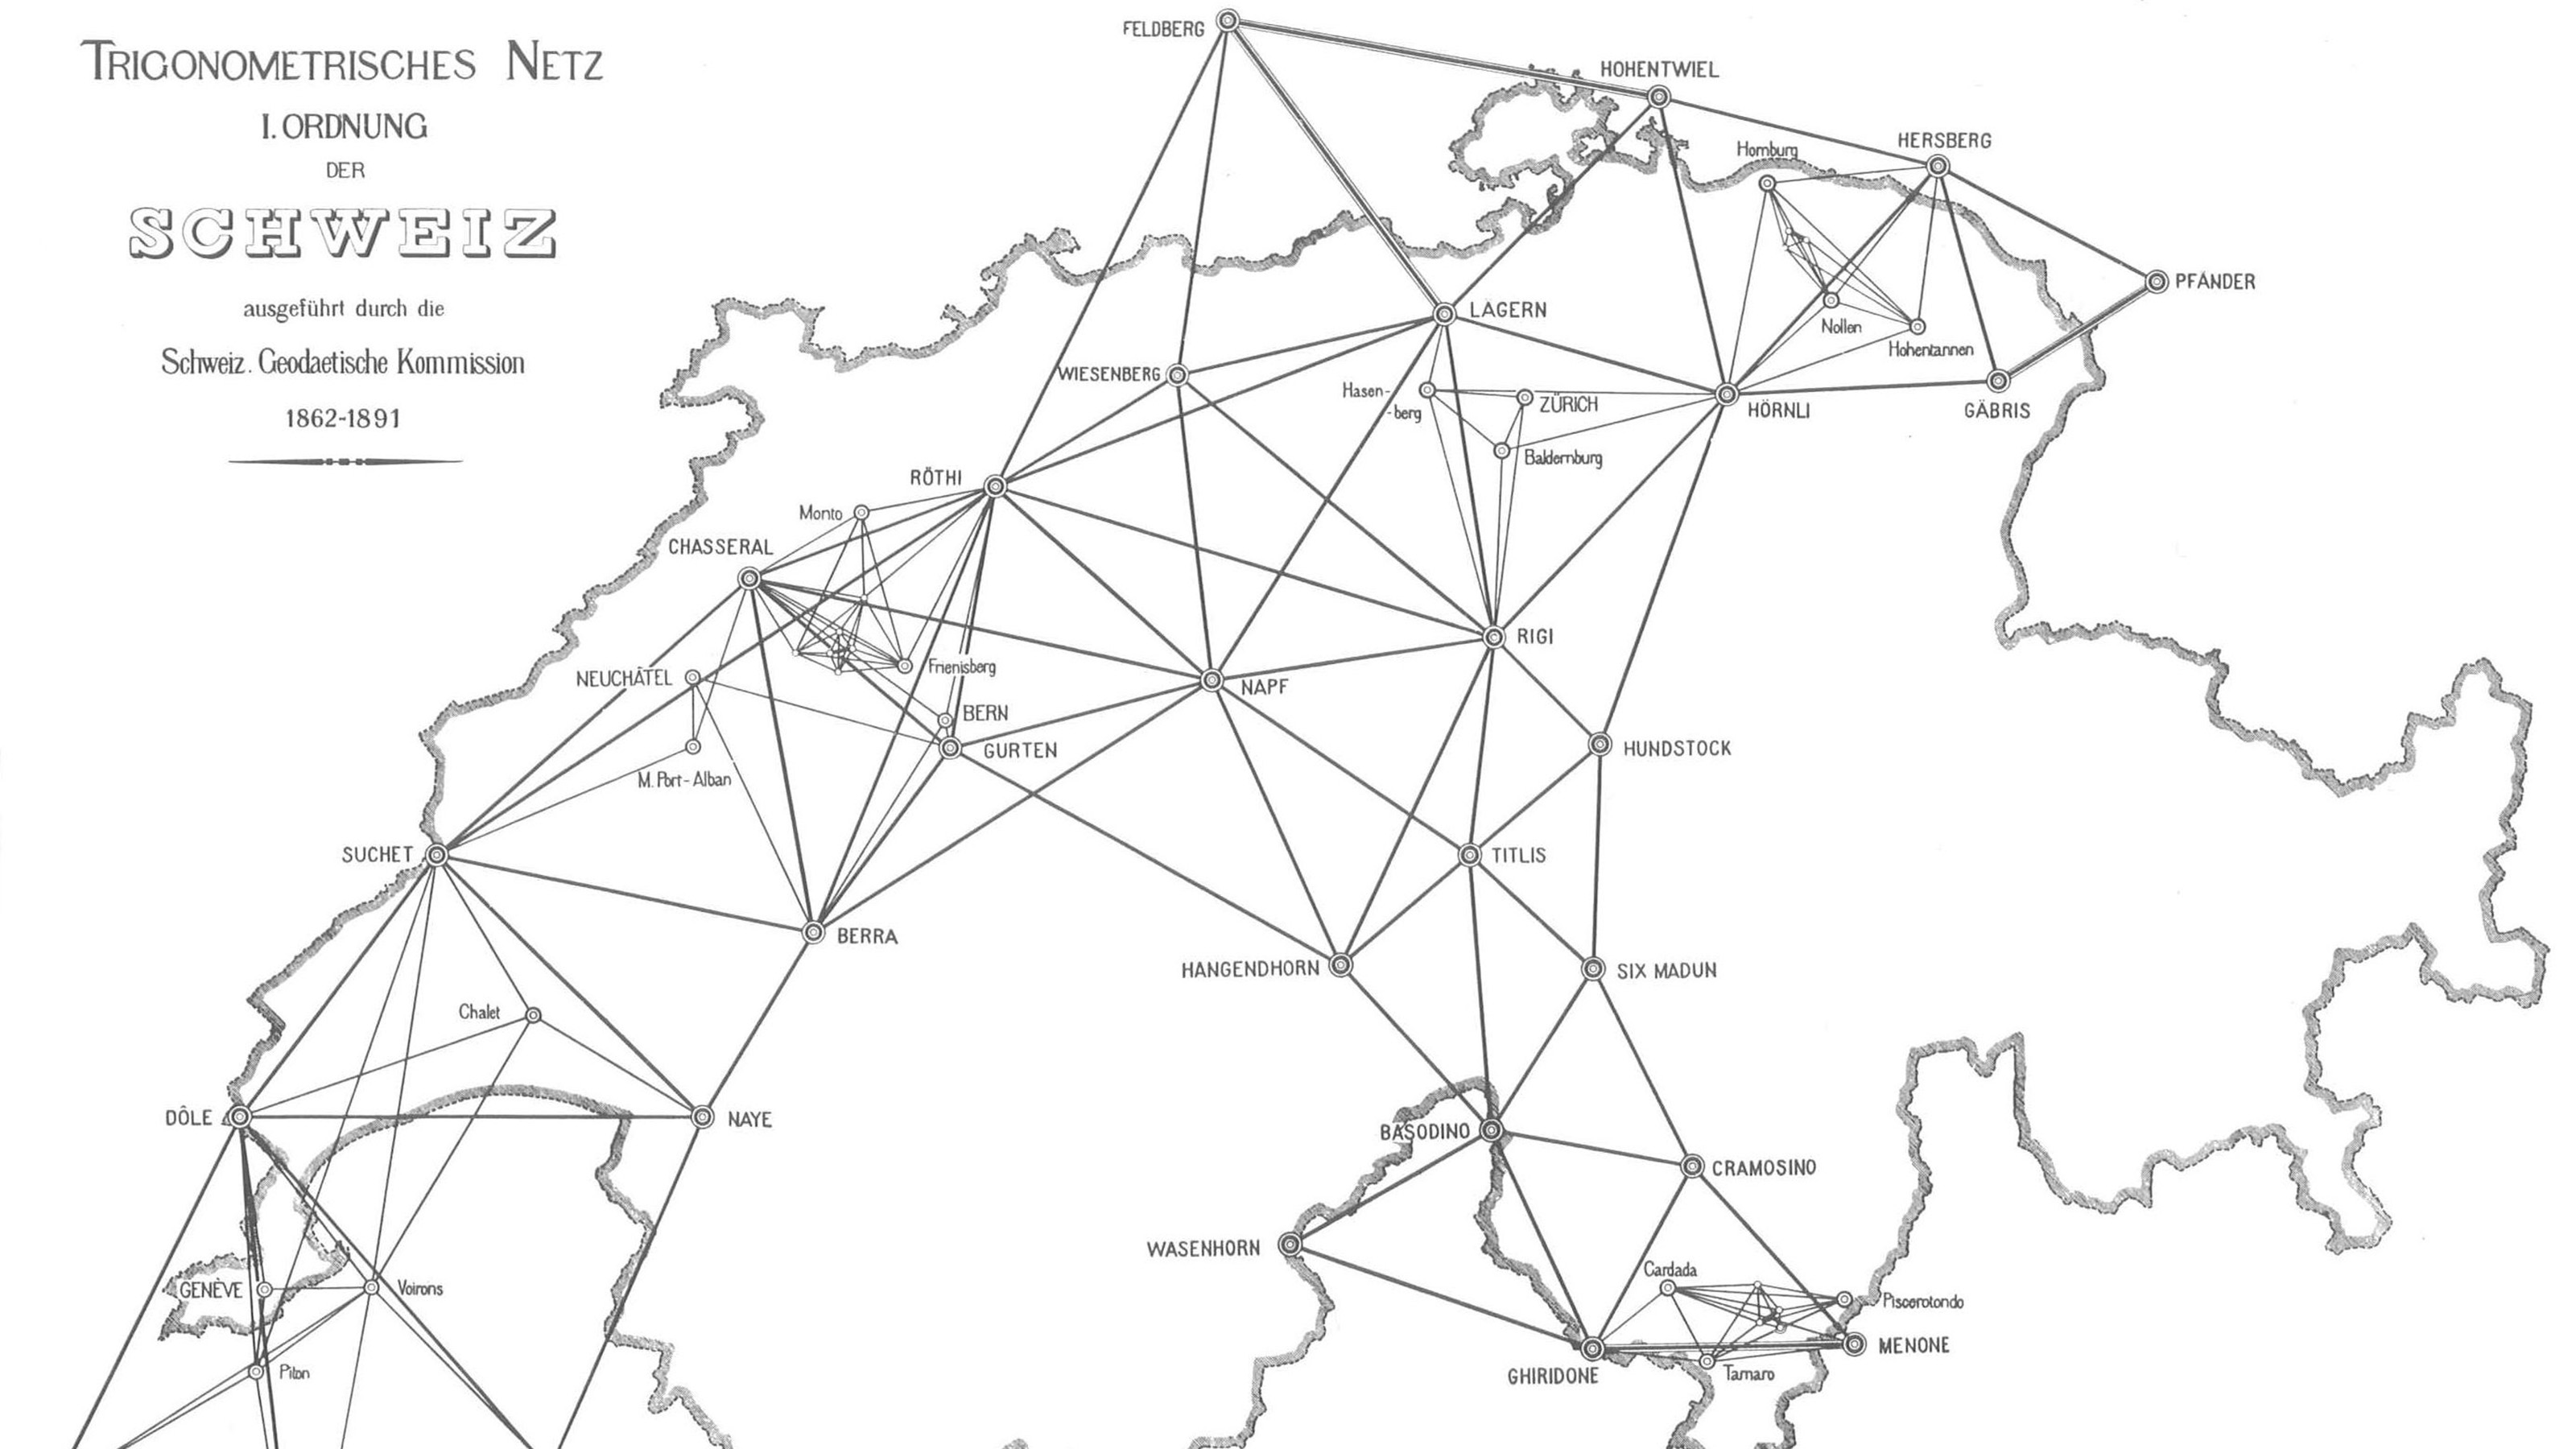 Triangulation network of Switzerland. Outline of Switzerland, measuring points and connecting lines. 